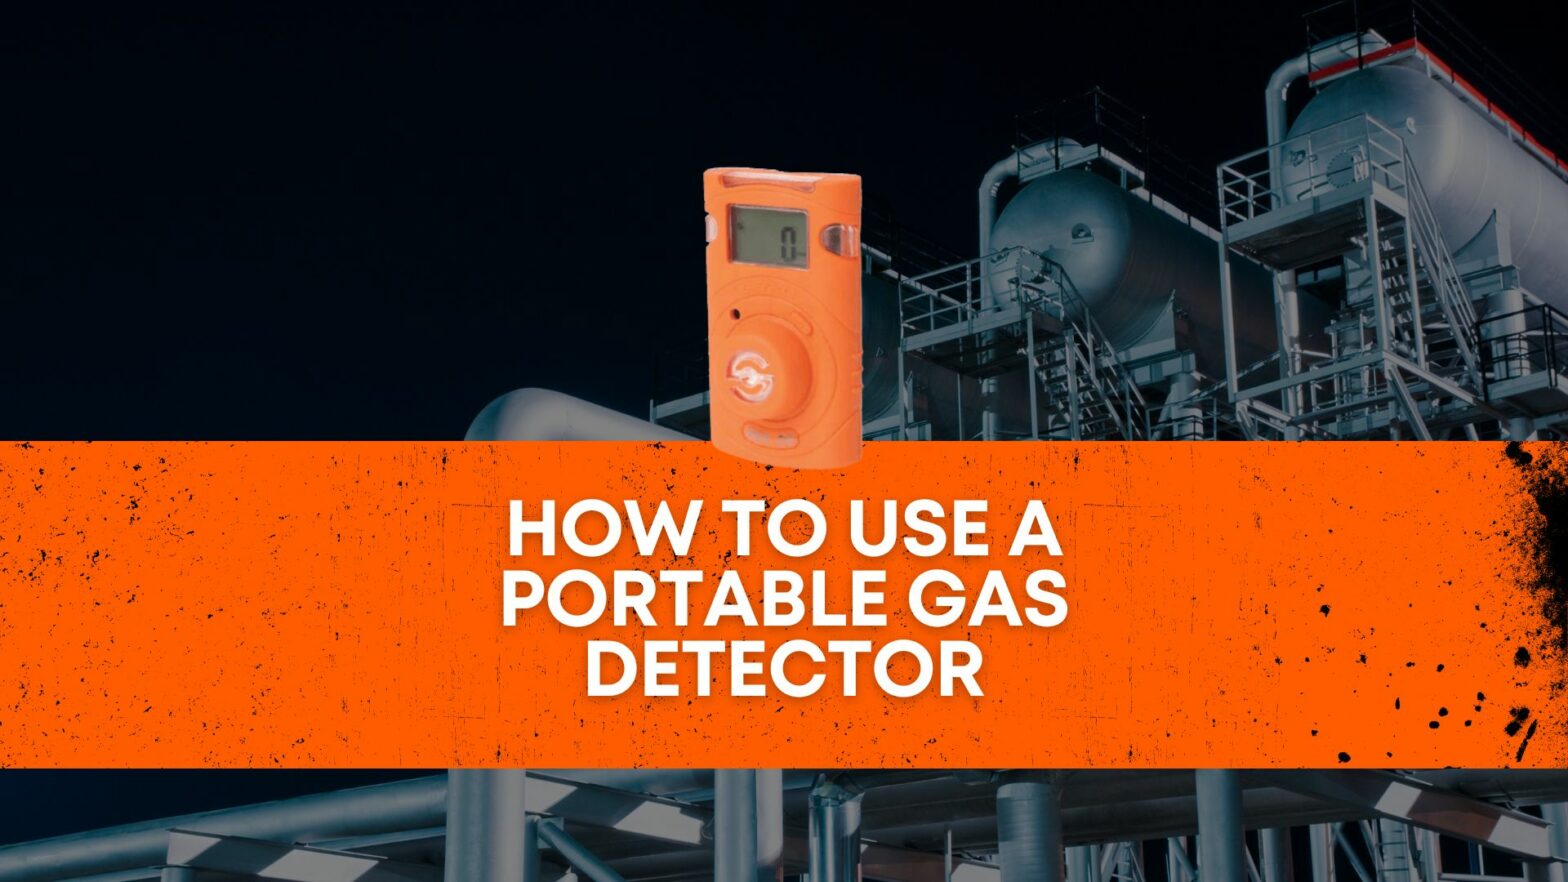 How to use a Portable Gas Detector